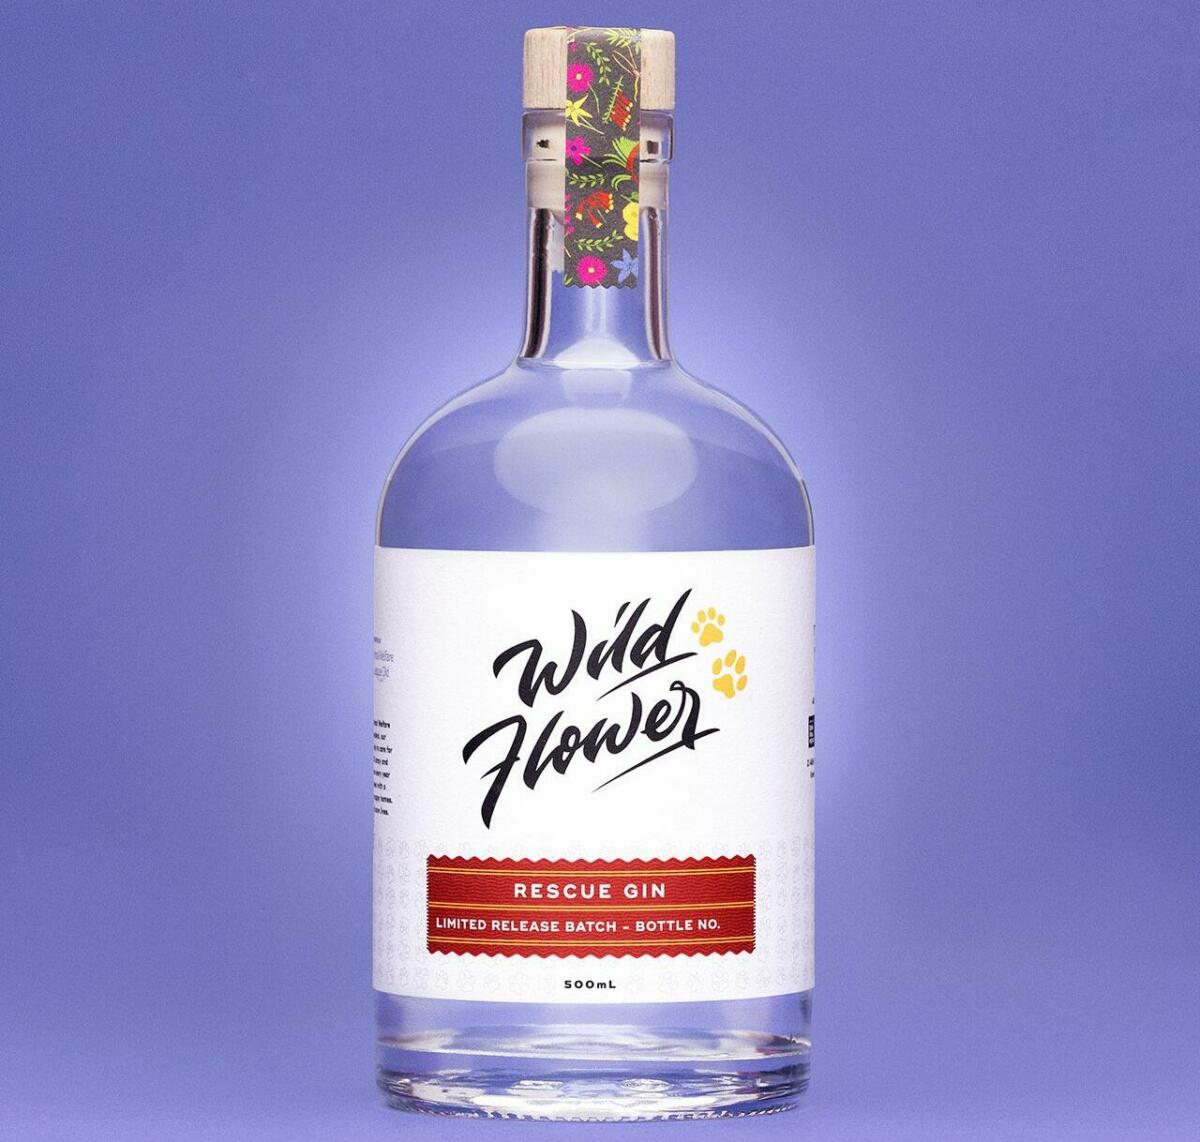 Rescue Gin by Wildflower Gin (image supplied)